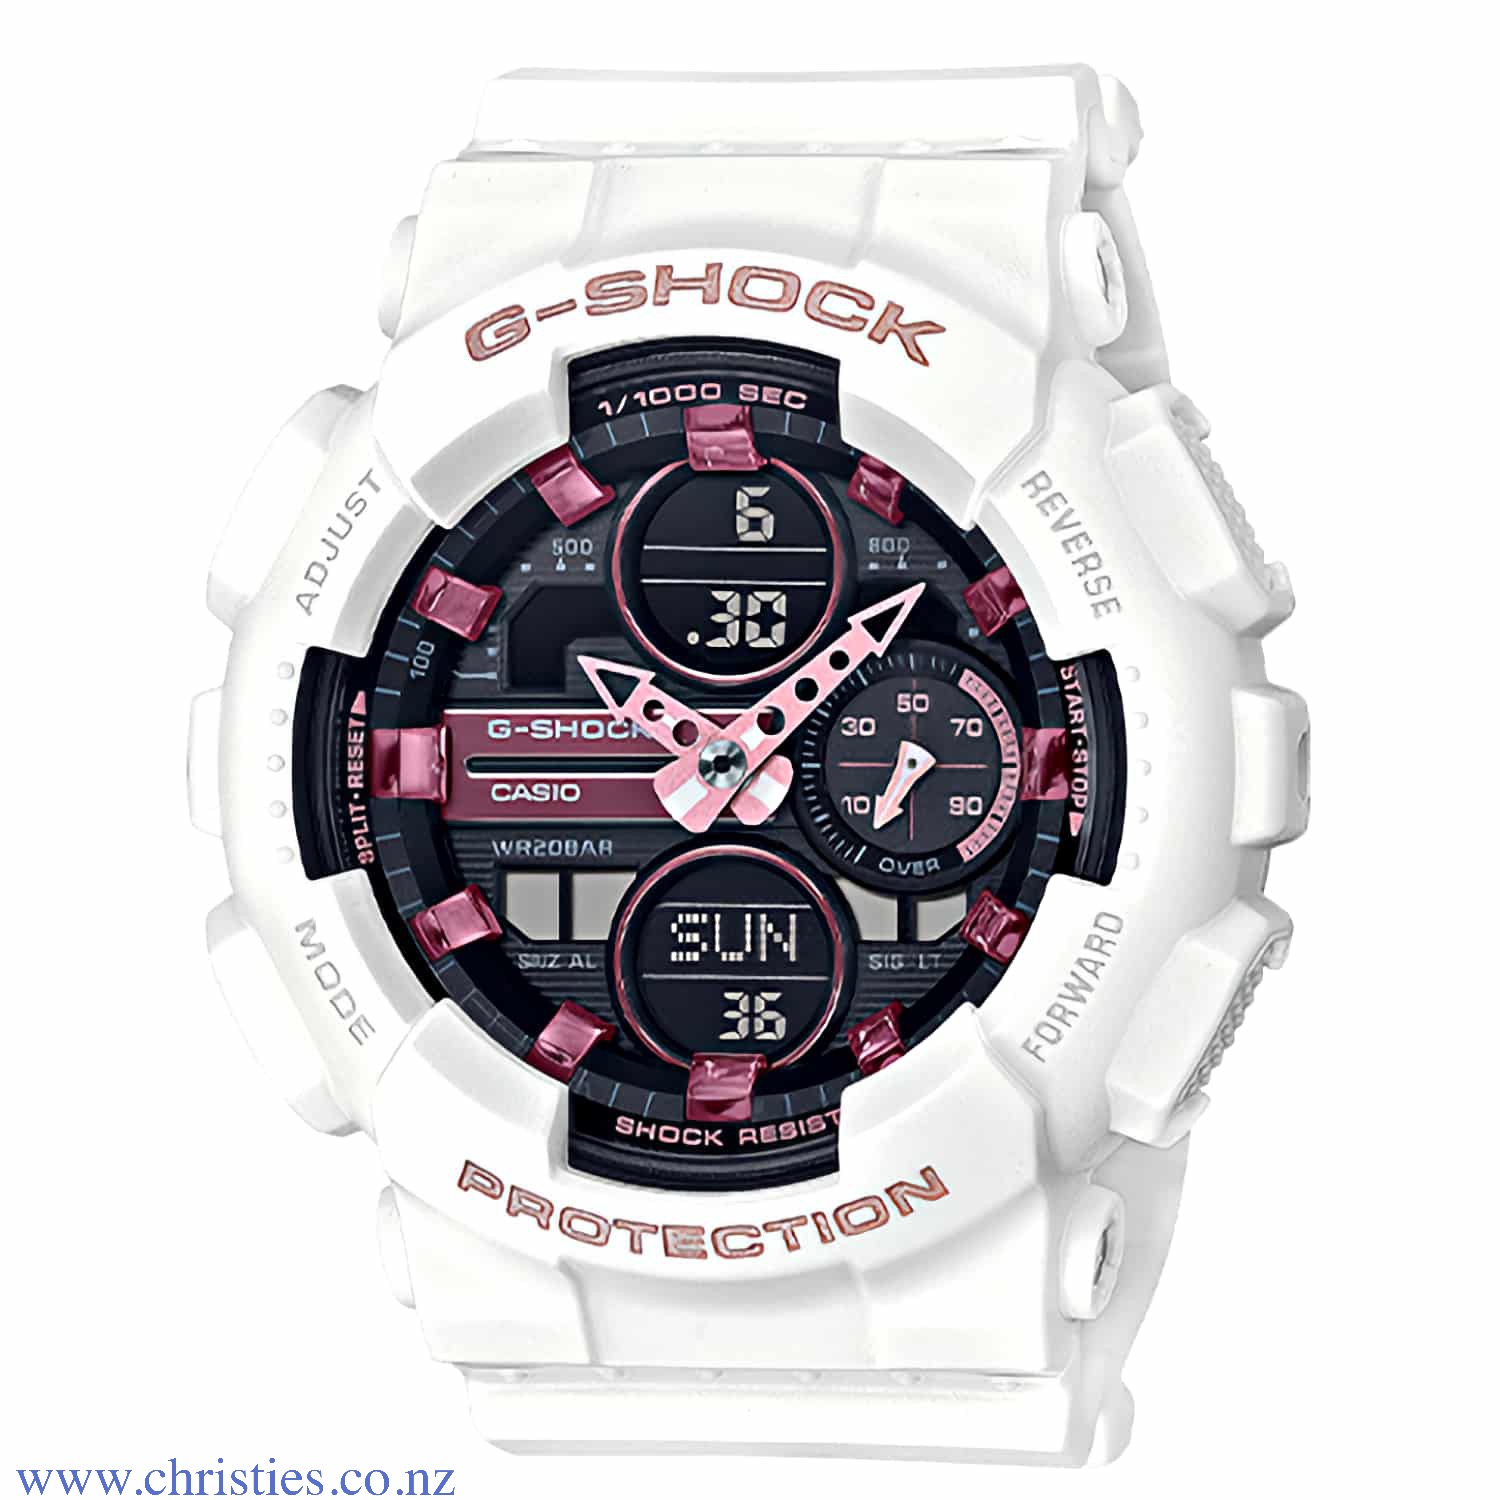 GMAS140M-7A Casio G-SHOCK  Womens Series Watch. Introducing new compact G-SHOCK models that are great choices for women who prefer G-SHOCK styling. These new models represent a down-sizing of the popular GA140. 2 Year Casio Guarantee which is only availab